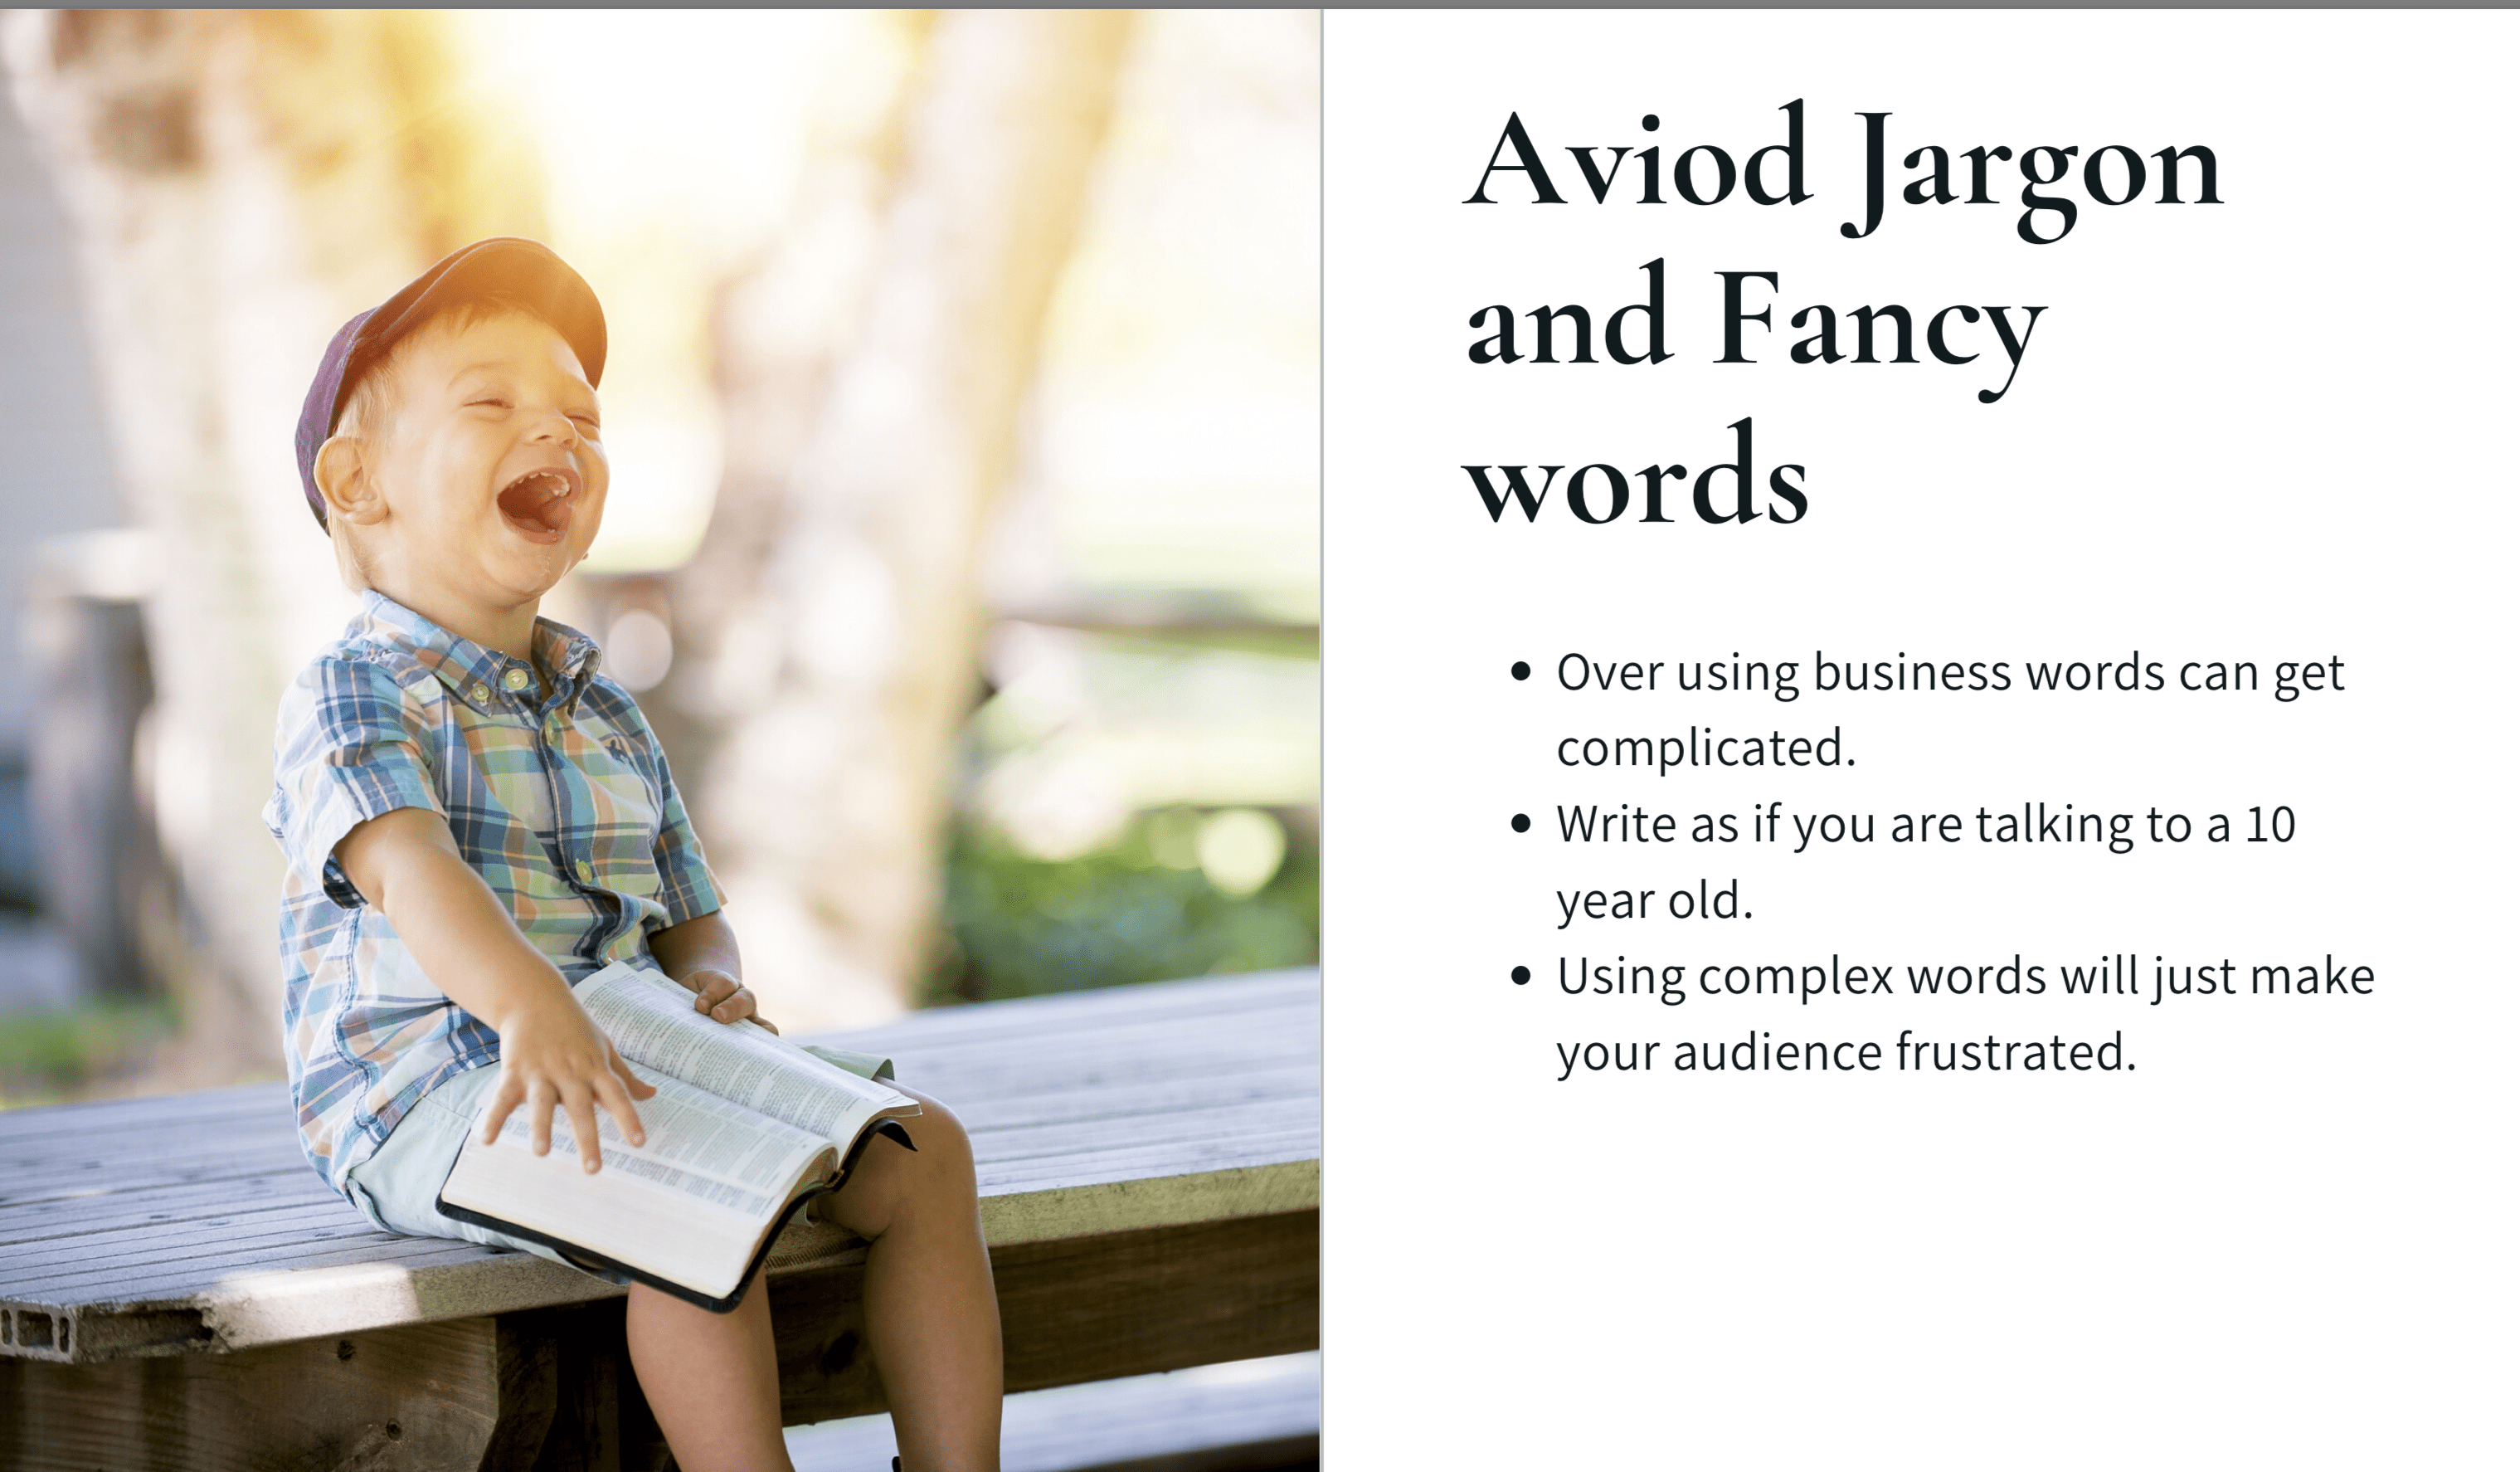 Avoid Jargon and Fancy Words